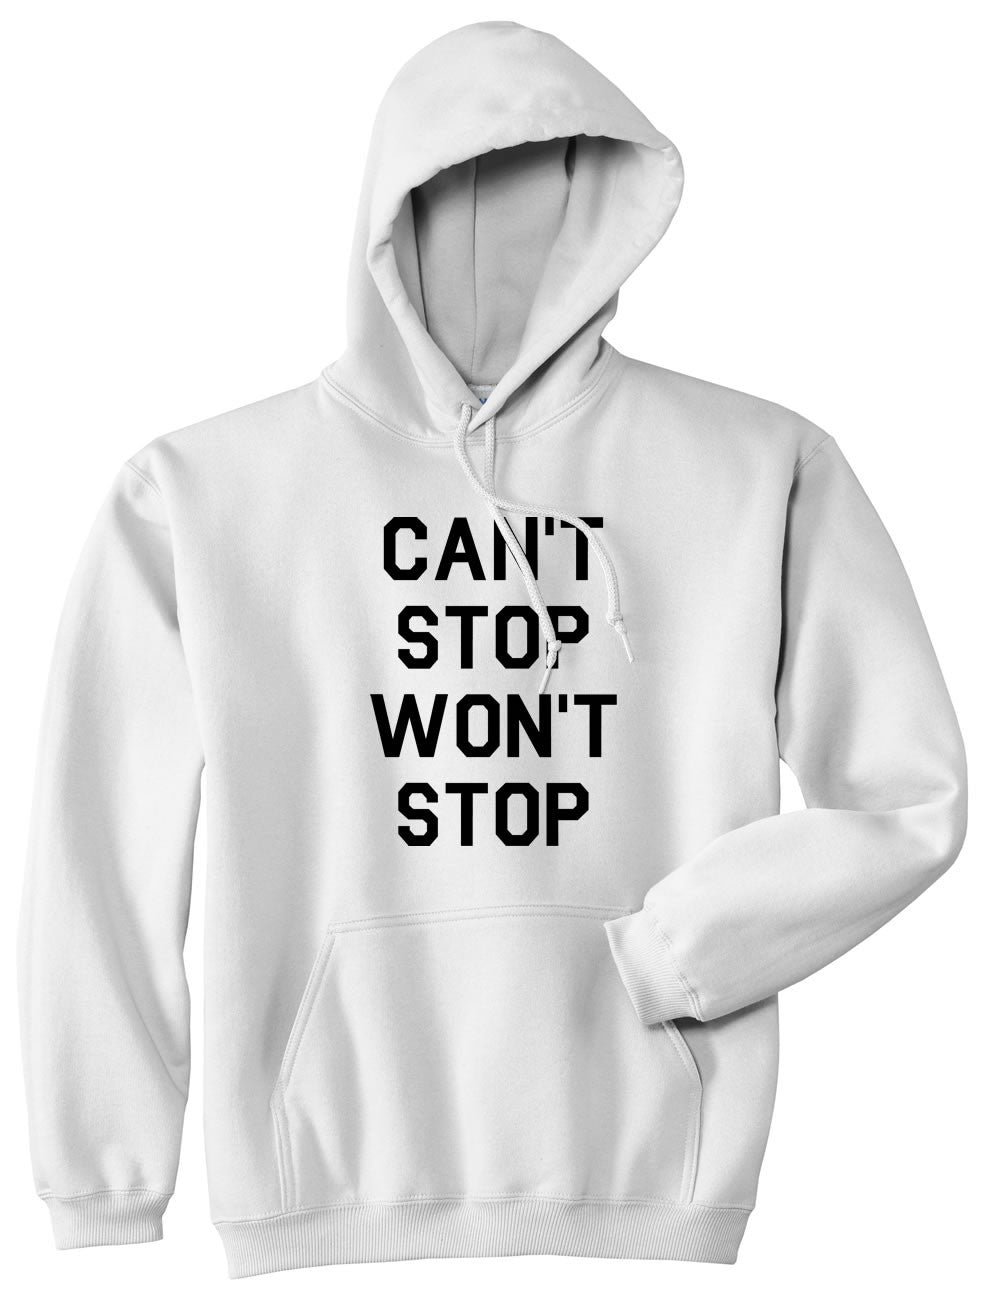  Kings Of NY Cant Stop Wont Stop Pullover Hoodie Hoody in White